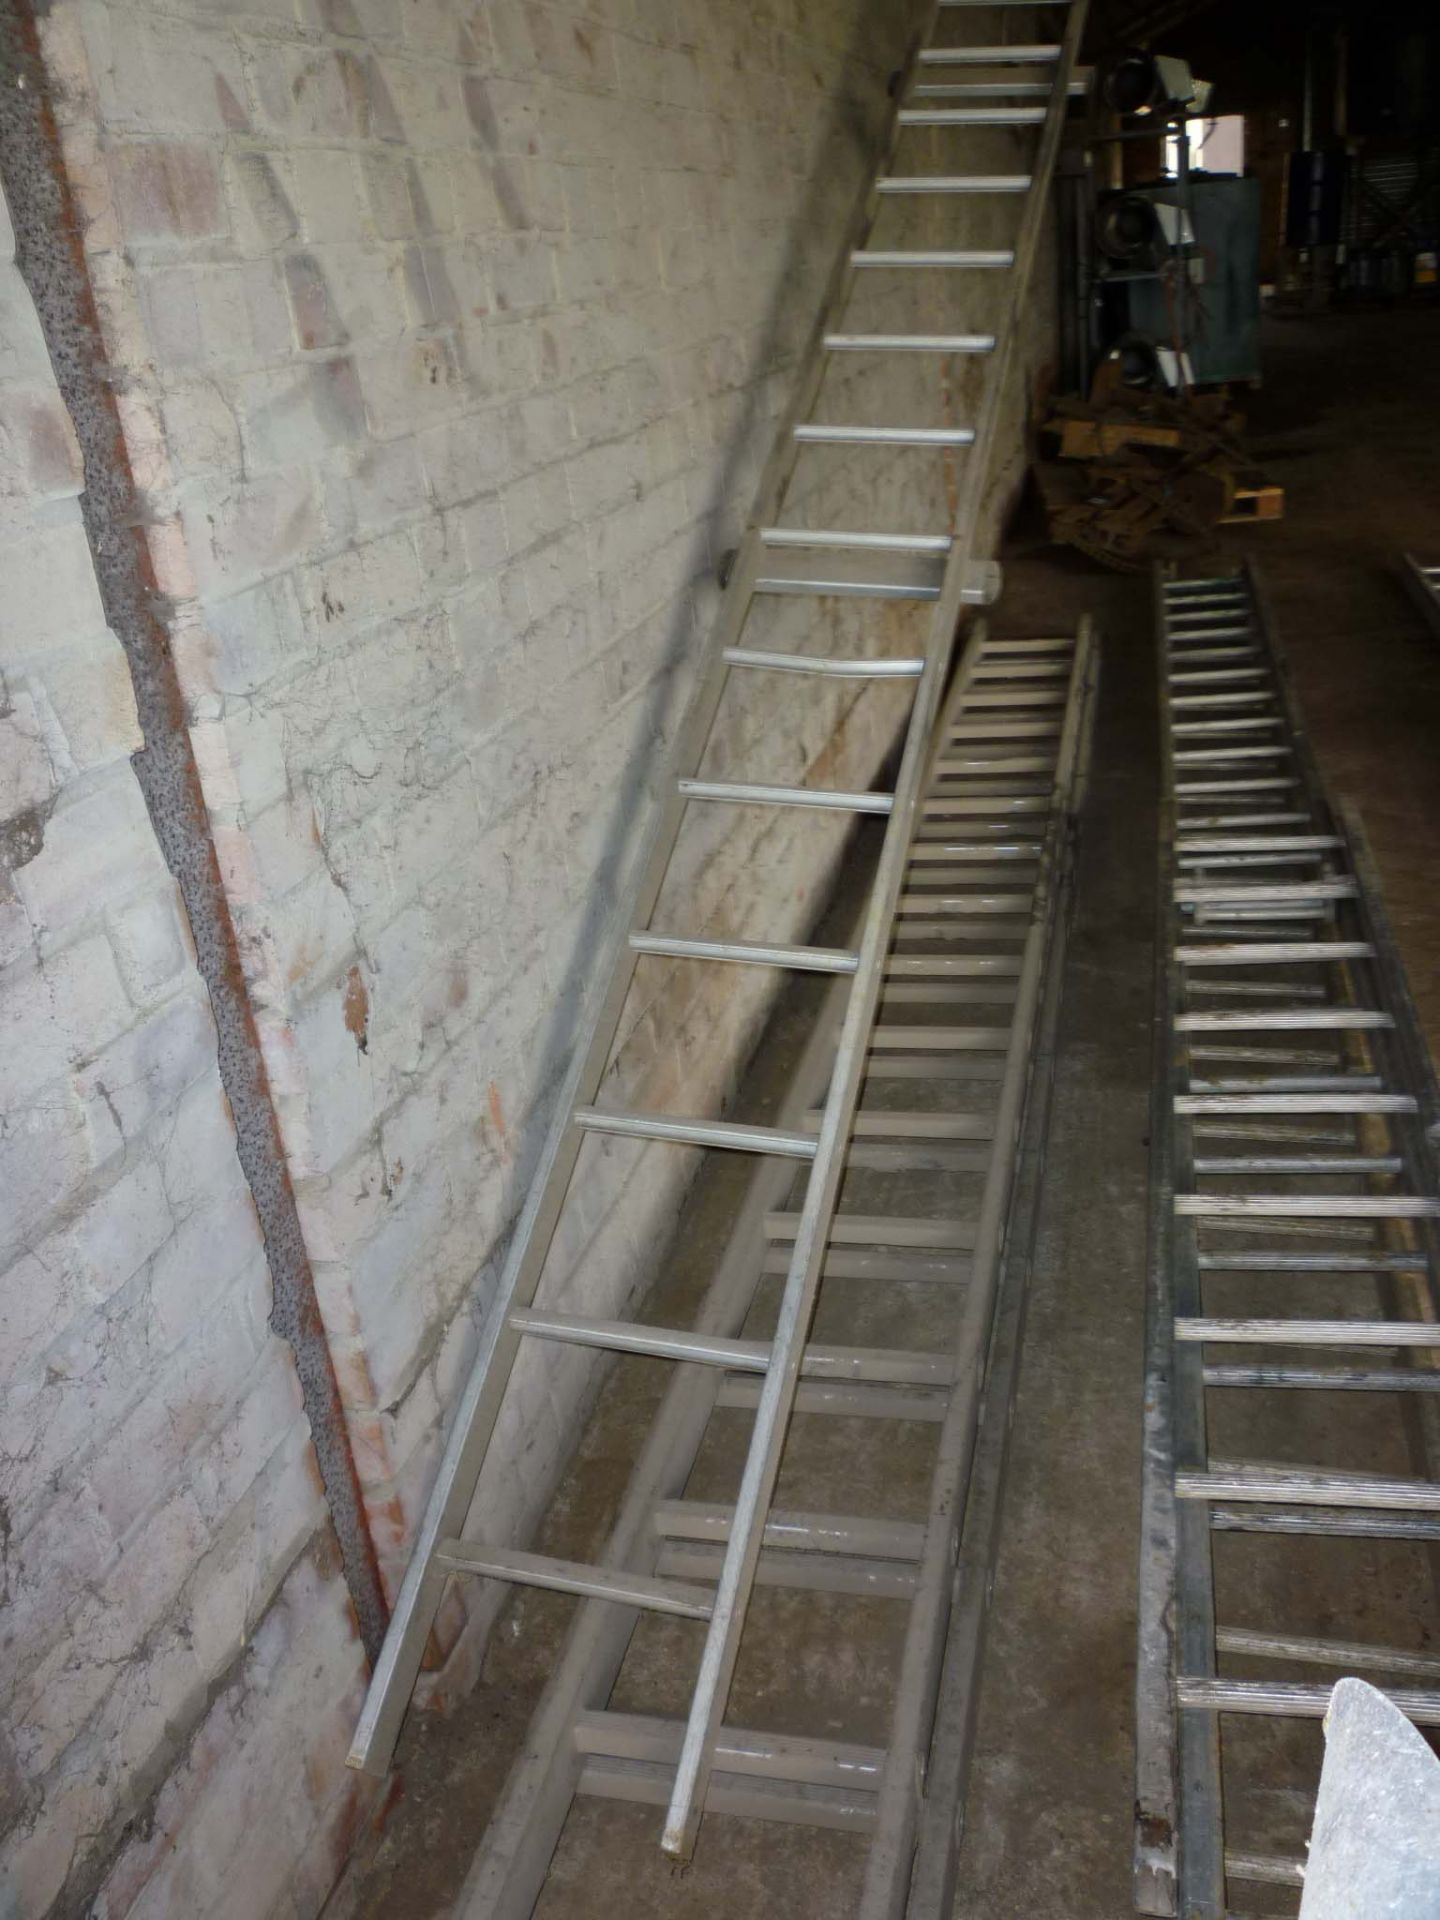 Extending ladder and roof ladder